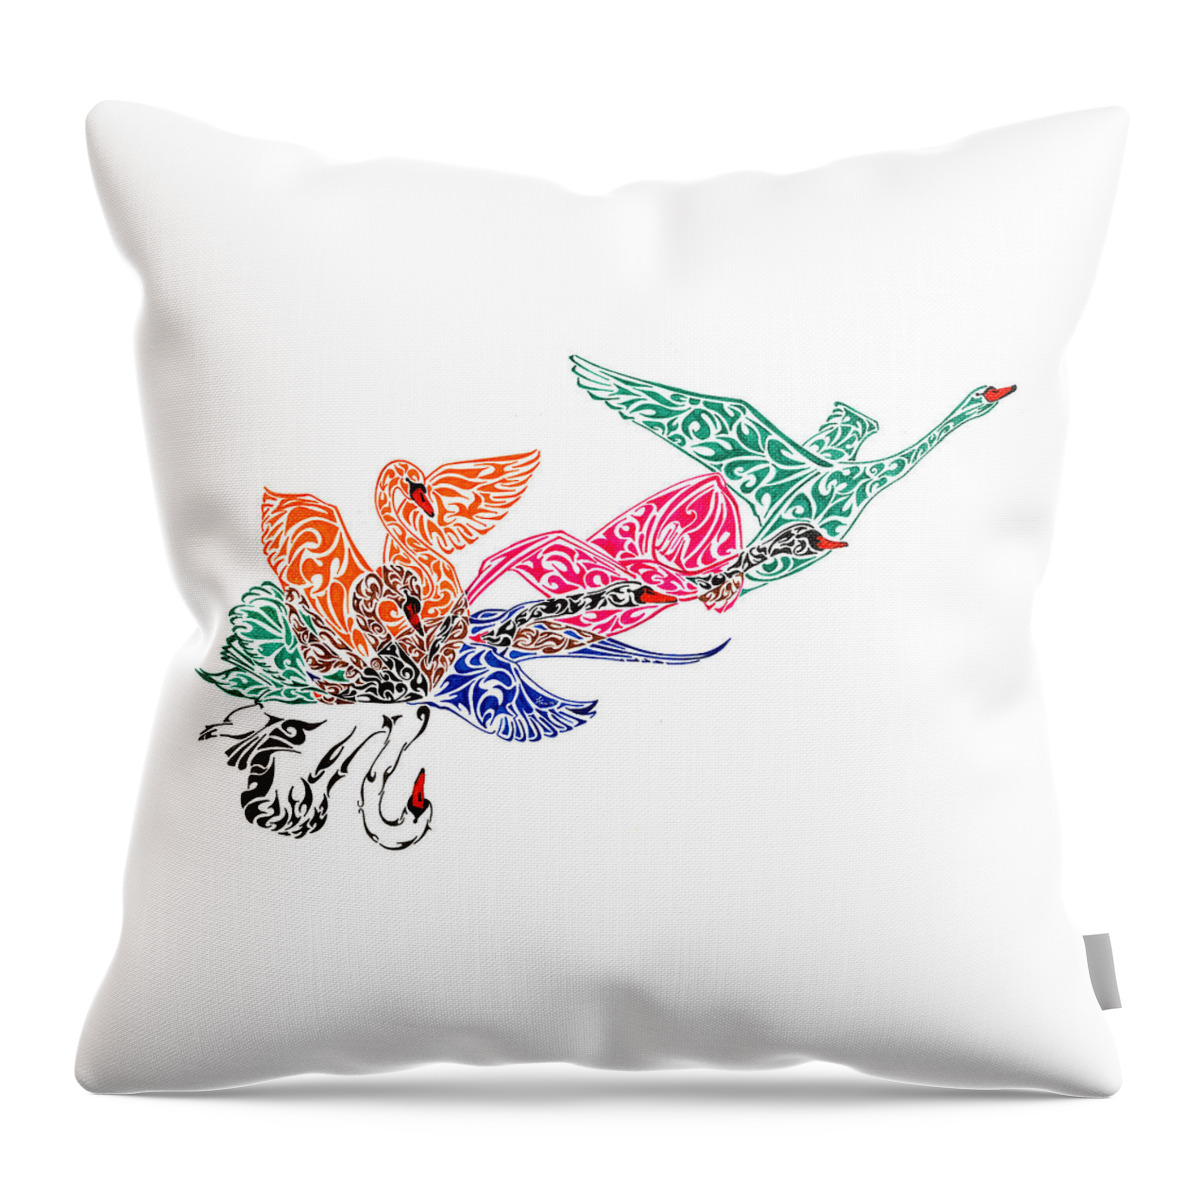 Doodle Throw Pillow featuring the painting Fly High by Anushree Santhosh